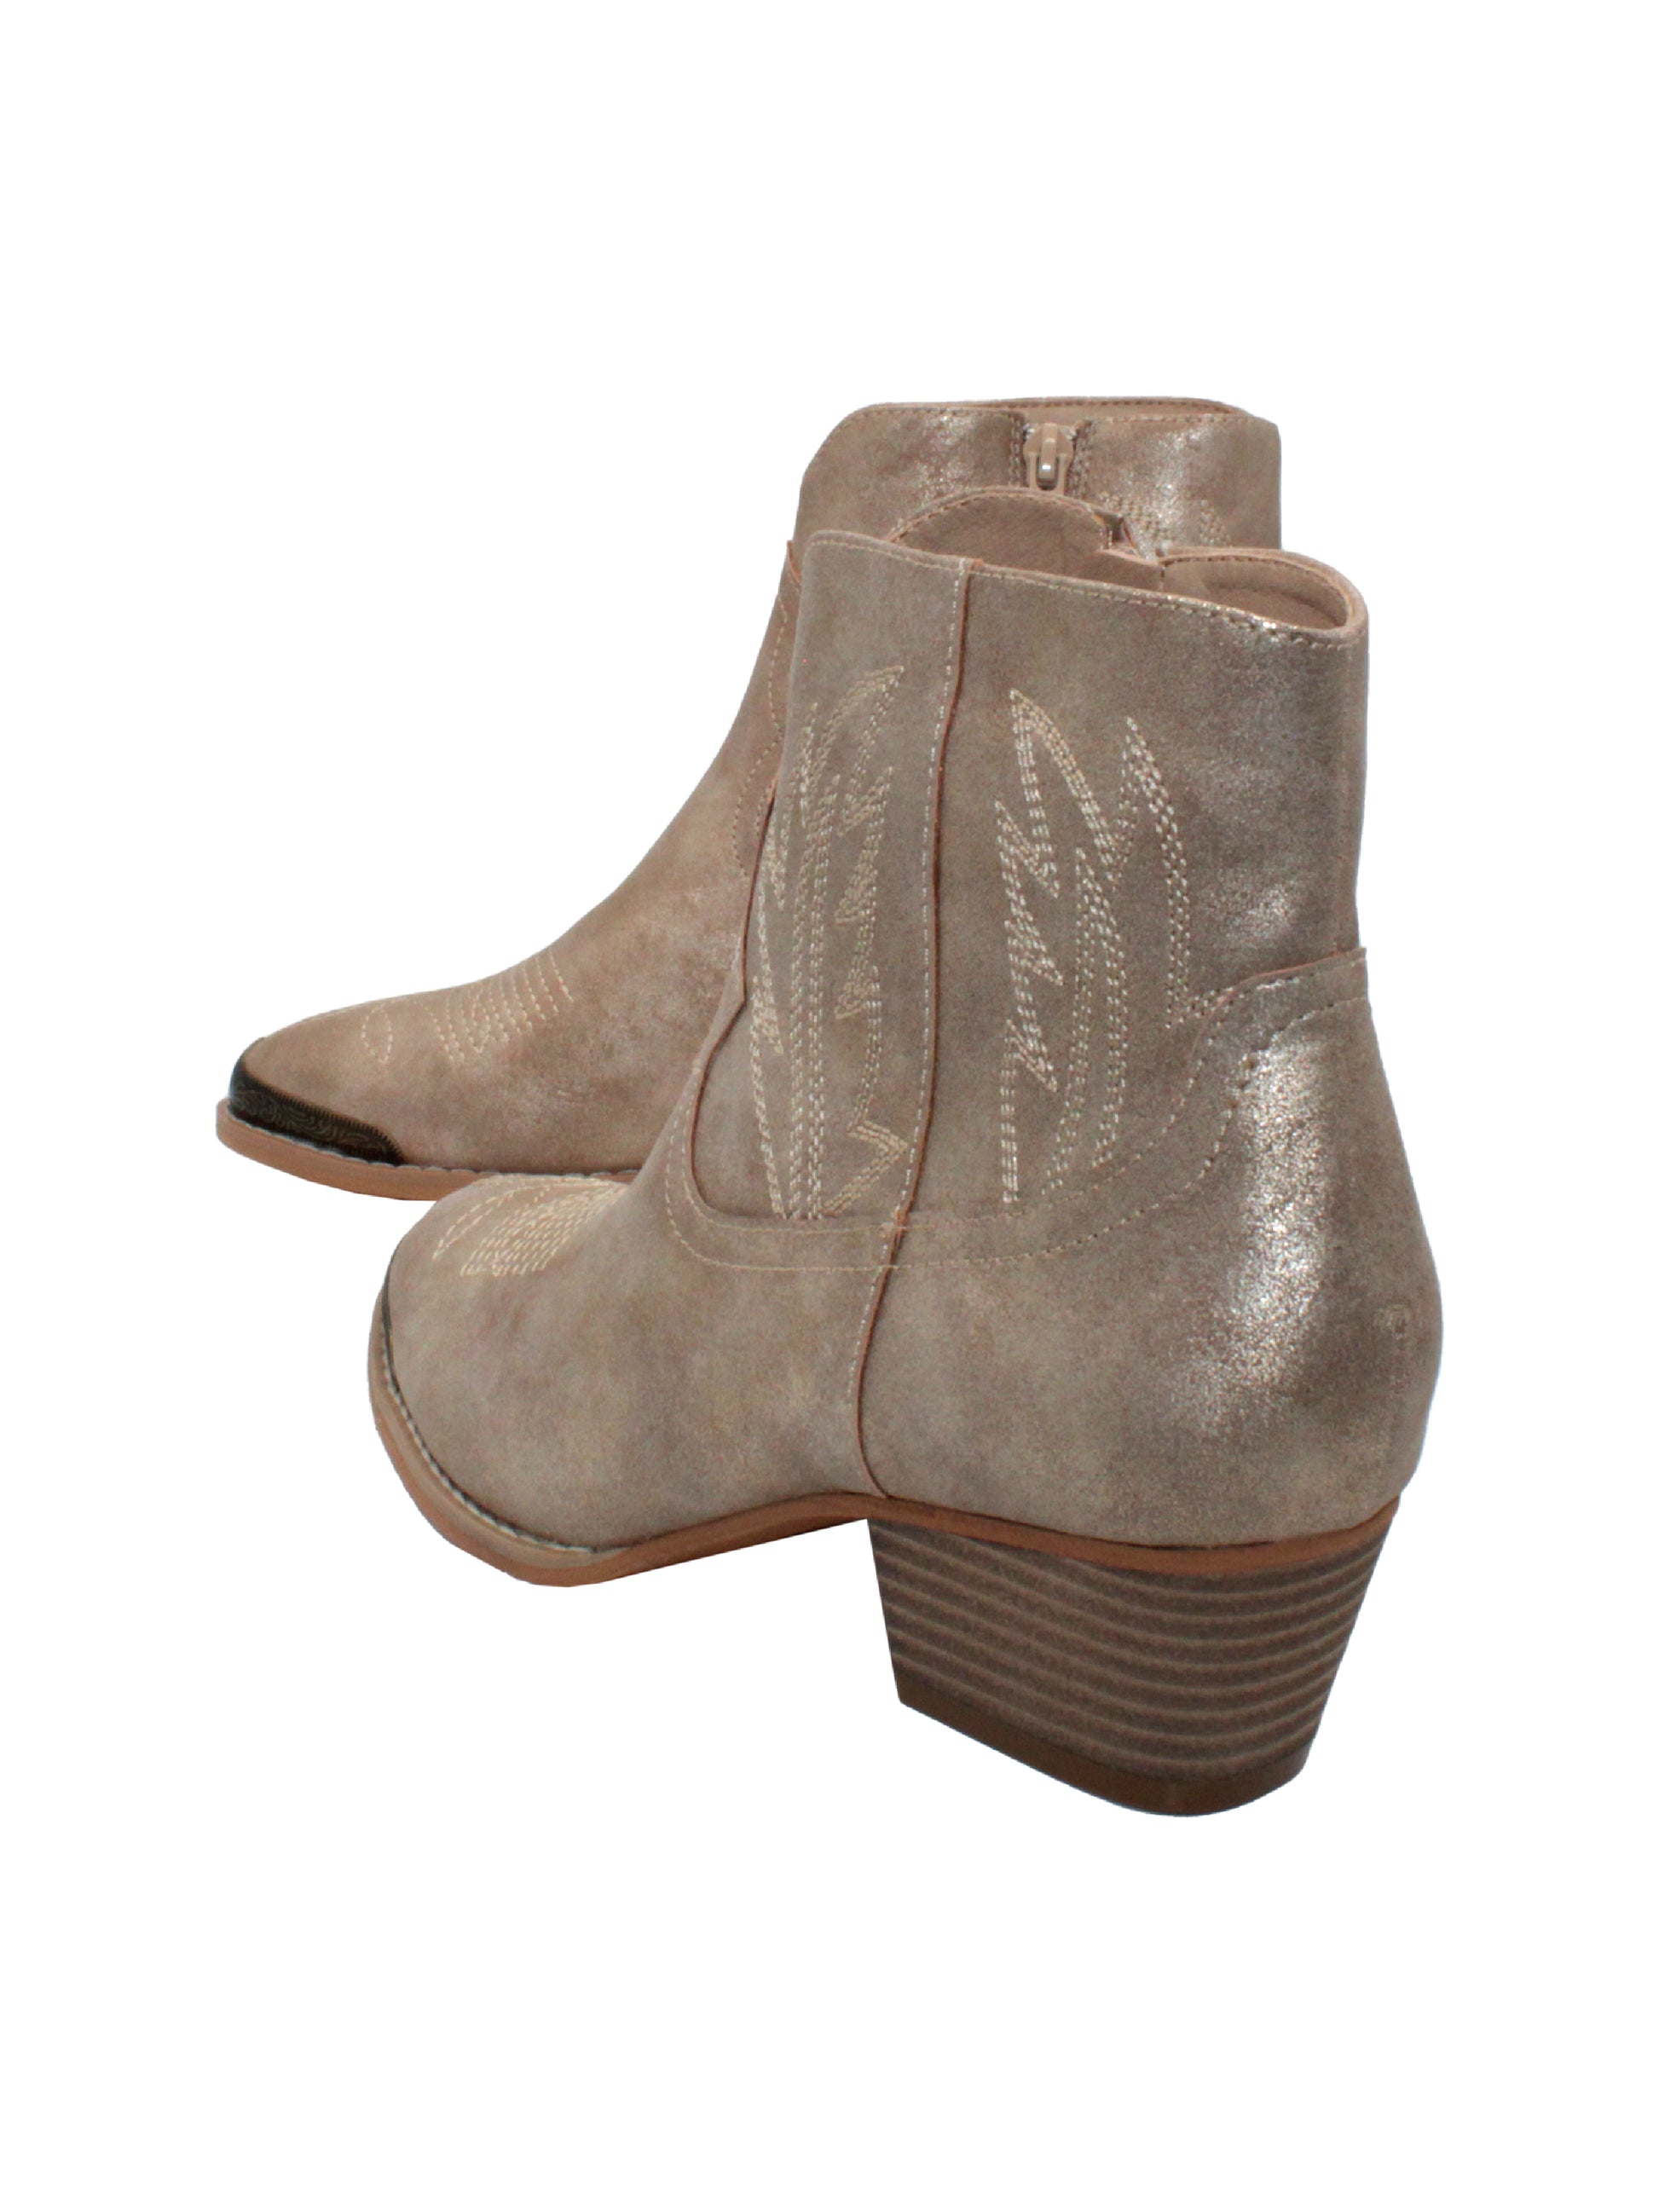 Very Volatile’s ‘Veruca’ bootie is sure to turn heads. The western inspired embroidery adds style to this easy to wear bootie silhouette. The inside nylon zipper allows for easy on and off, just zip these on with your favorite pair of denim and head straight into the weekend.